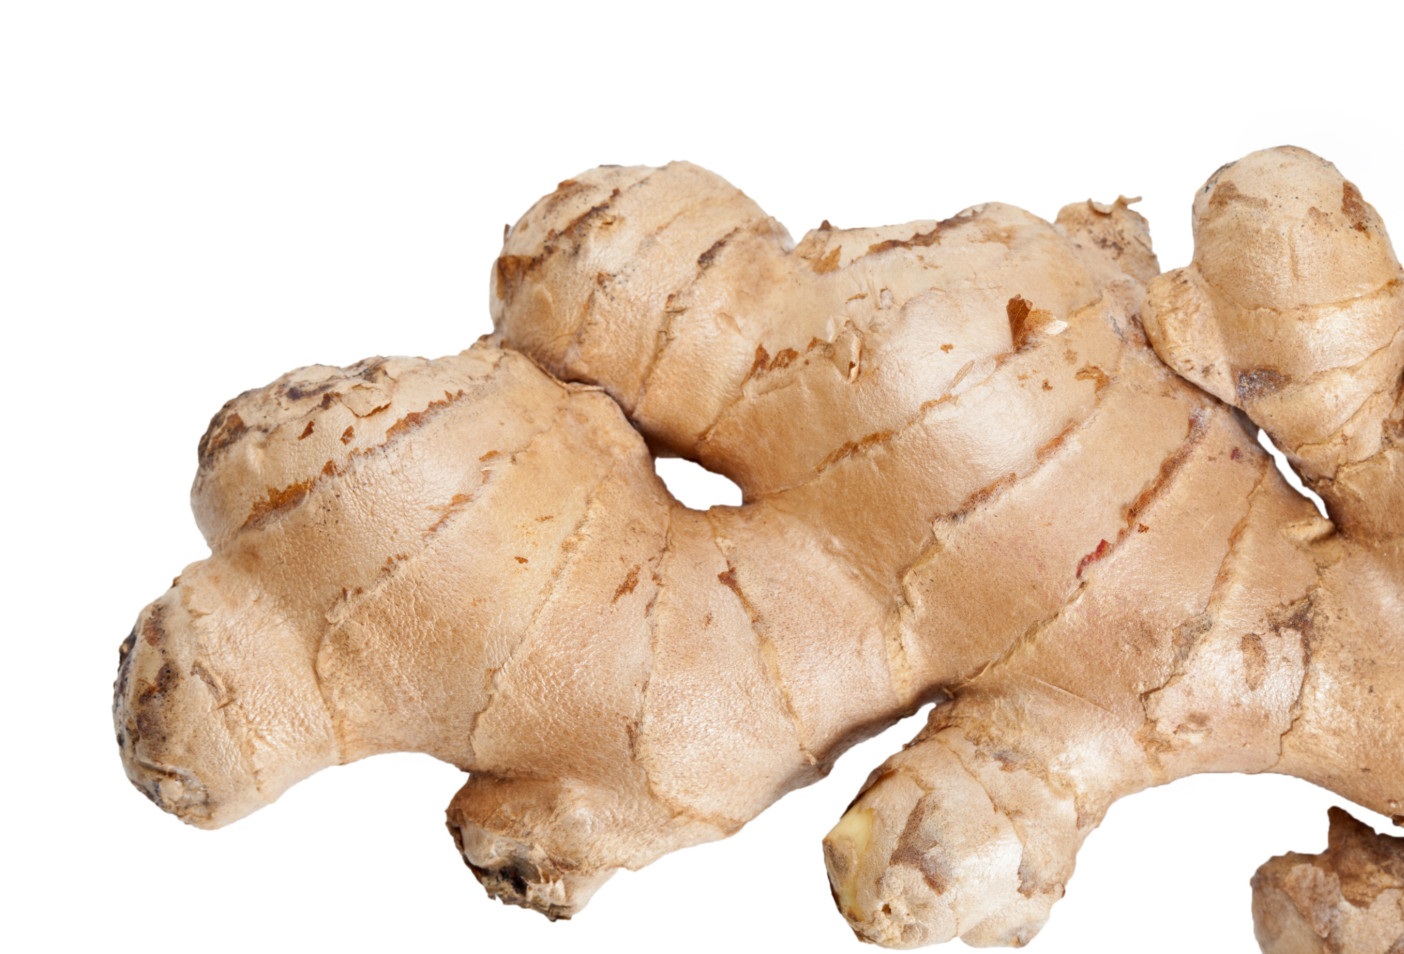 6-shogaol, is produced when ginger roots are dried or cooked